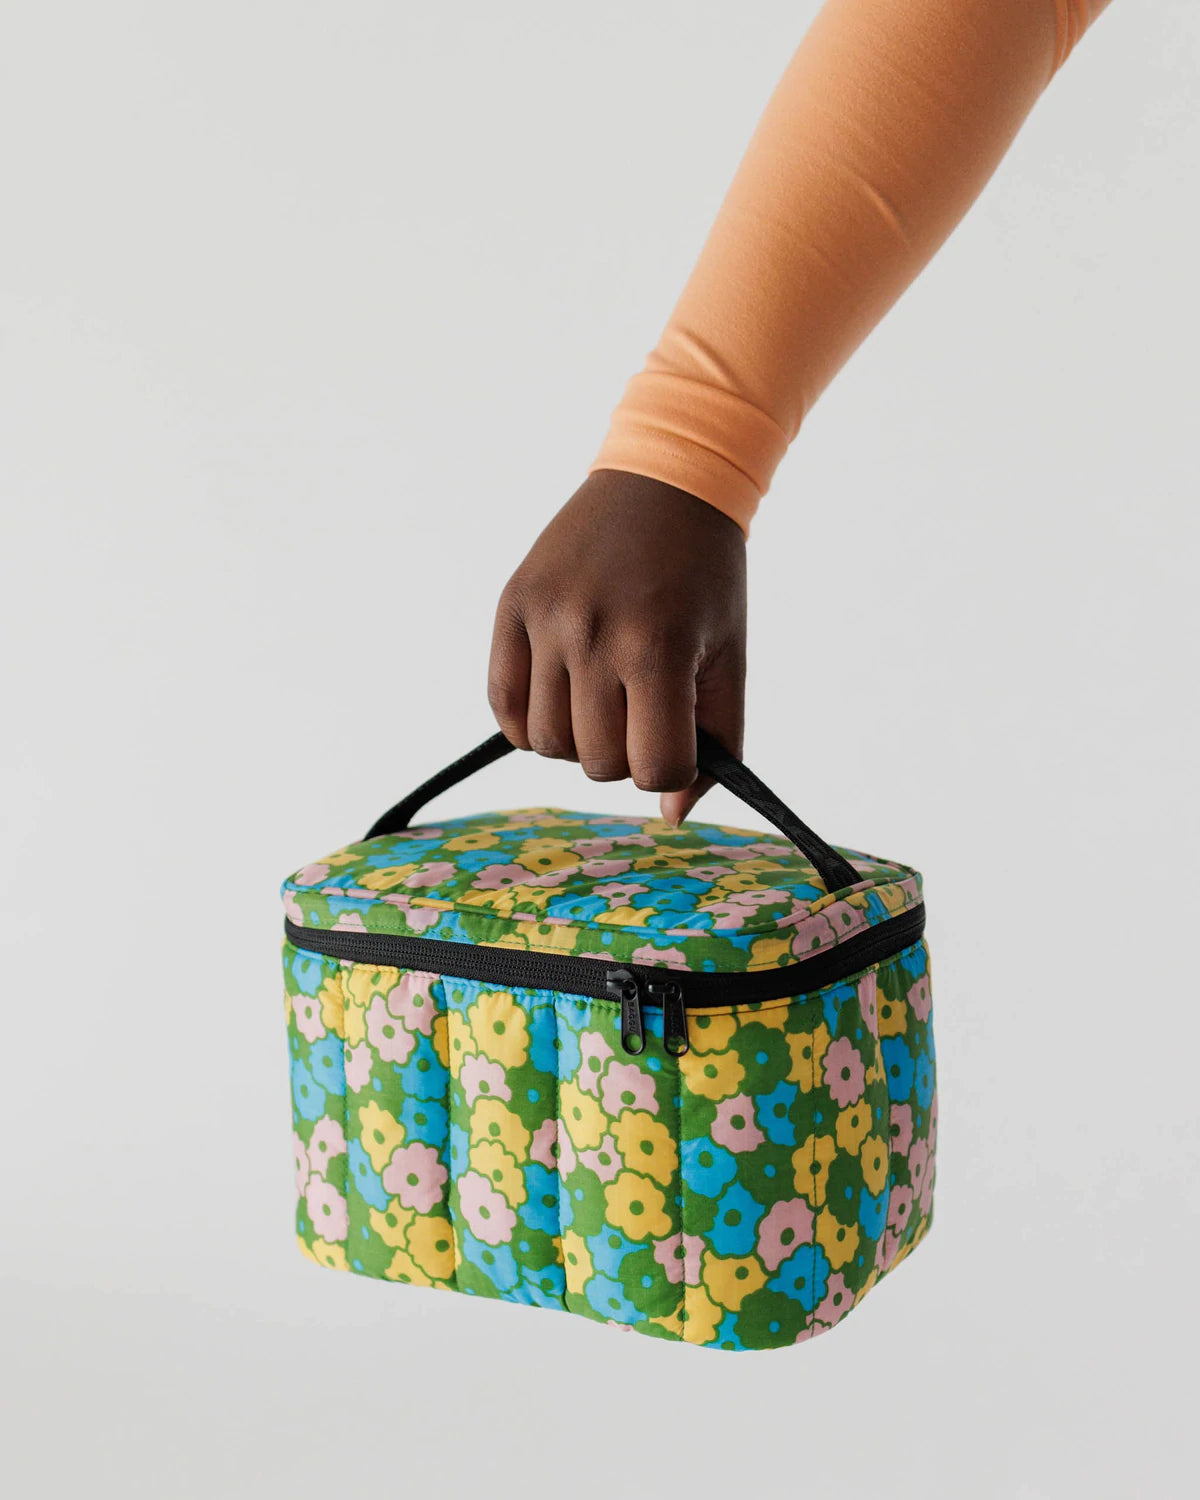 The Flowerbed Puffy Lunch Bag by Baggu